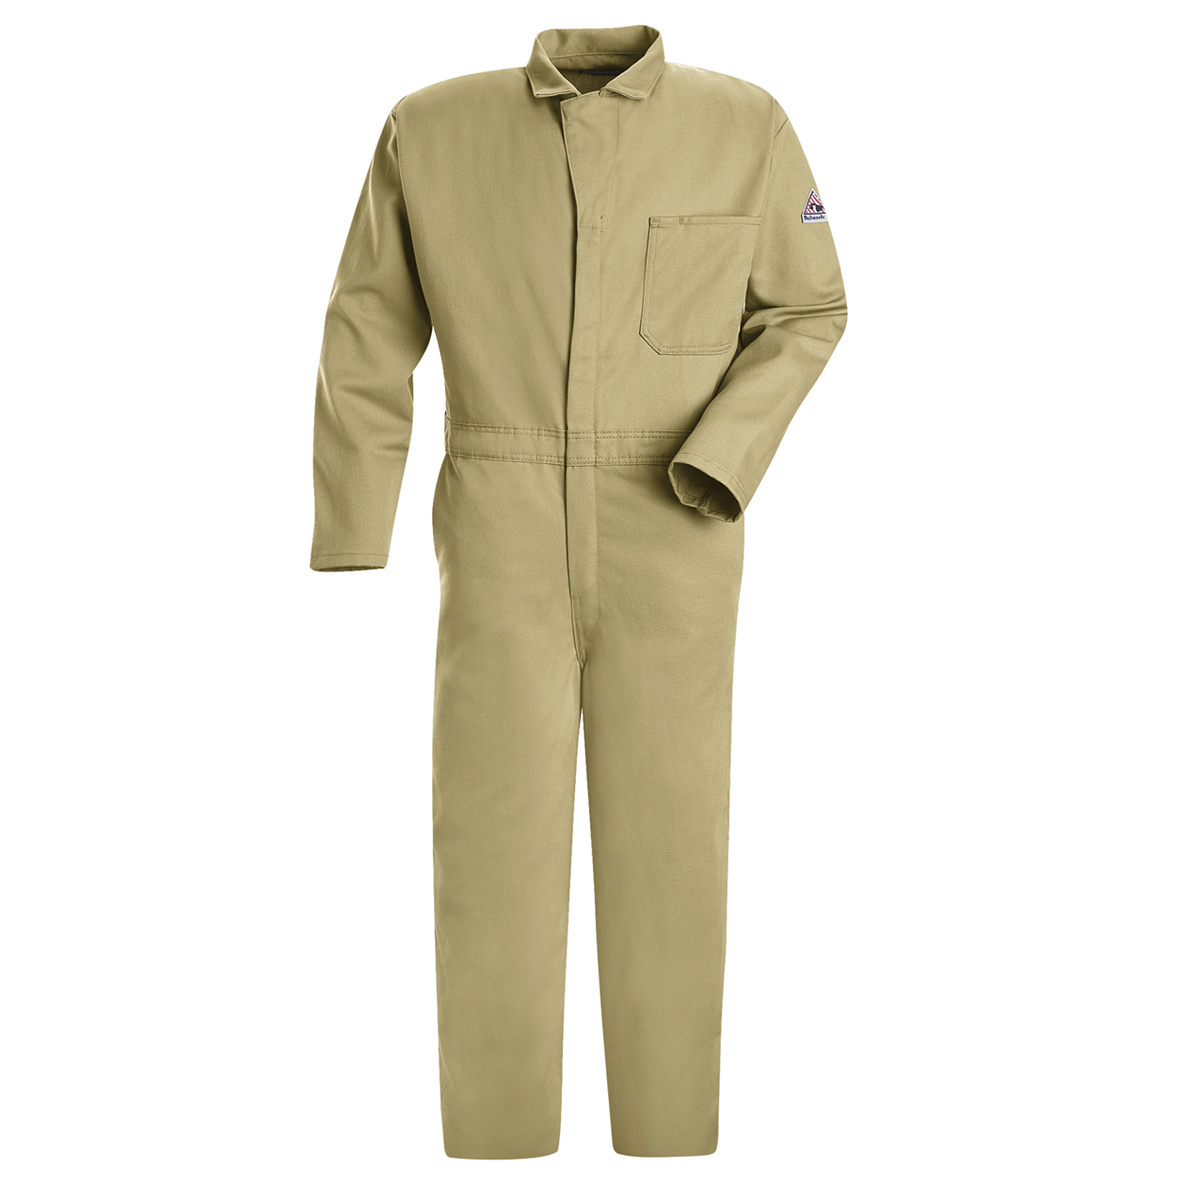 Bulwark® 52 Regular Khaki EXCEL FR® Twill Cotton Flame Resistant Coveralls With Zipper Front Closure